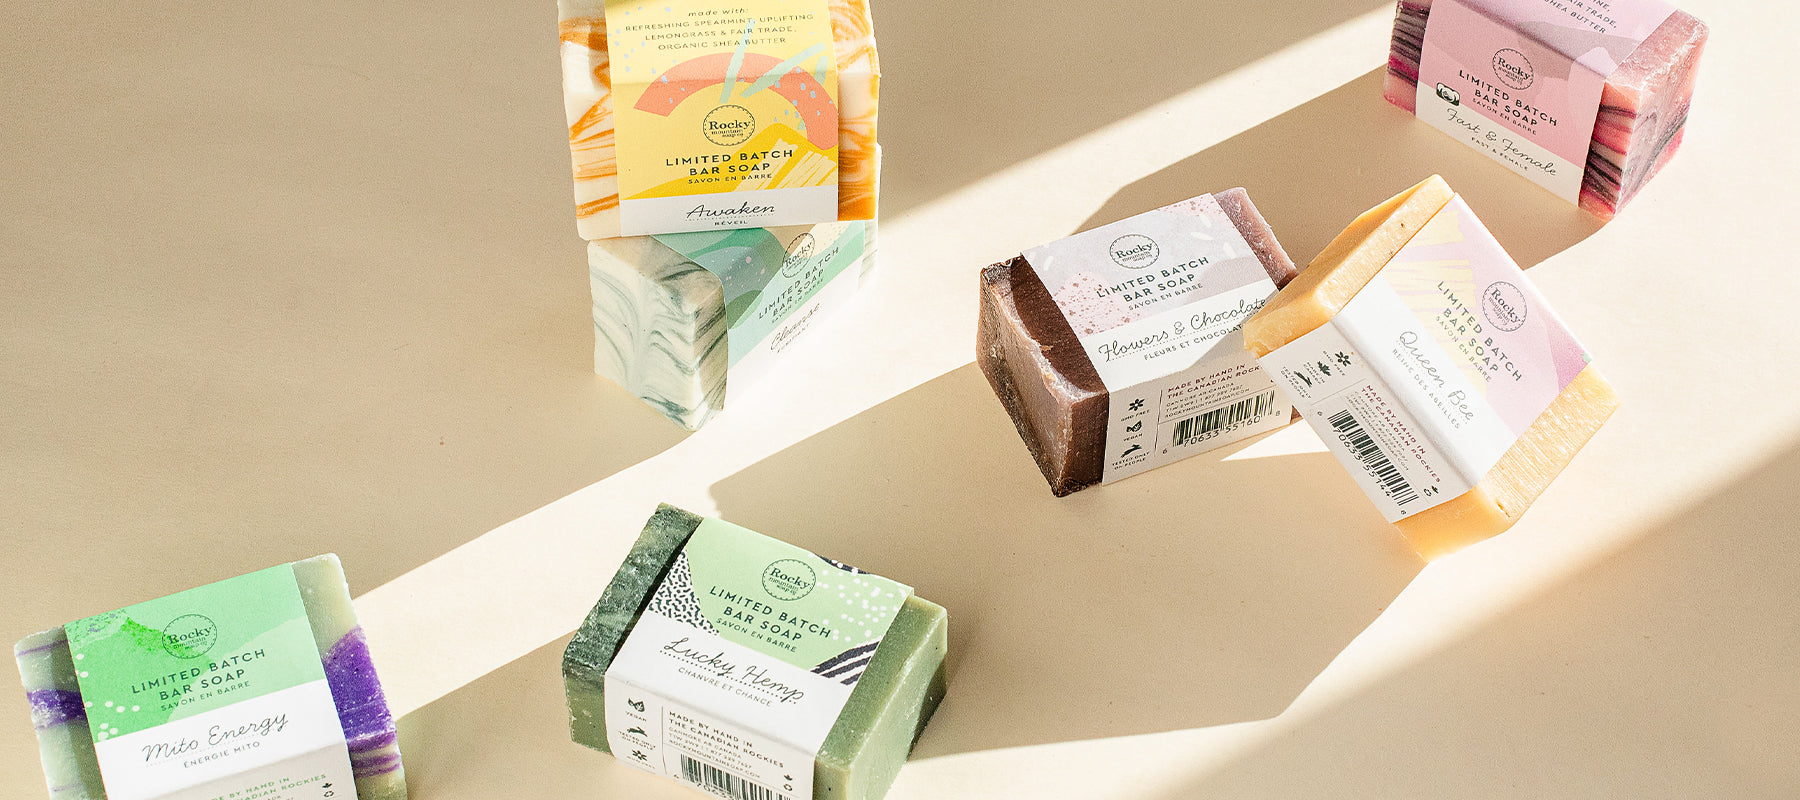 All natural bar soaps from Rocky mountain soap company. 